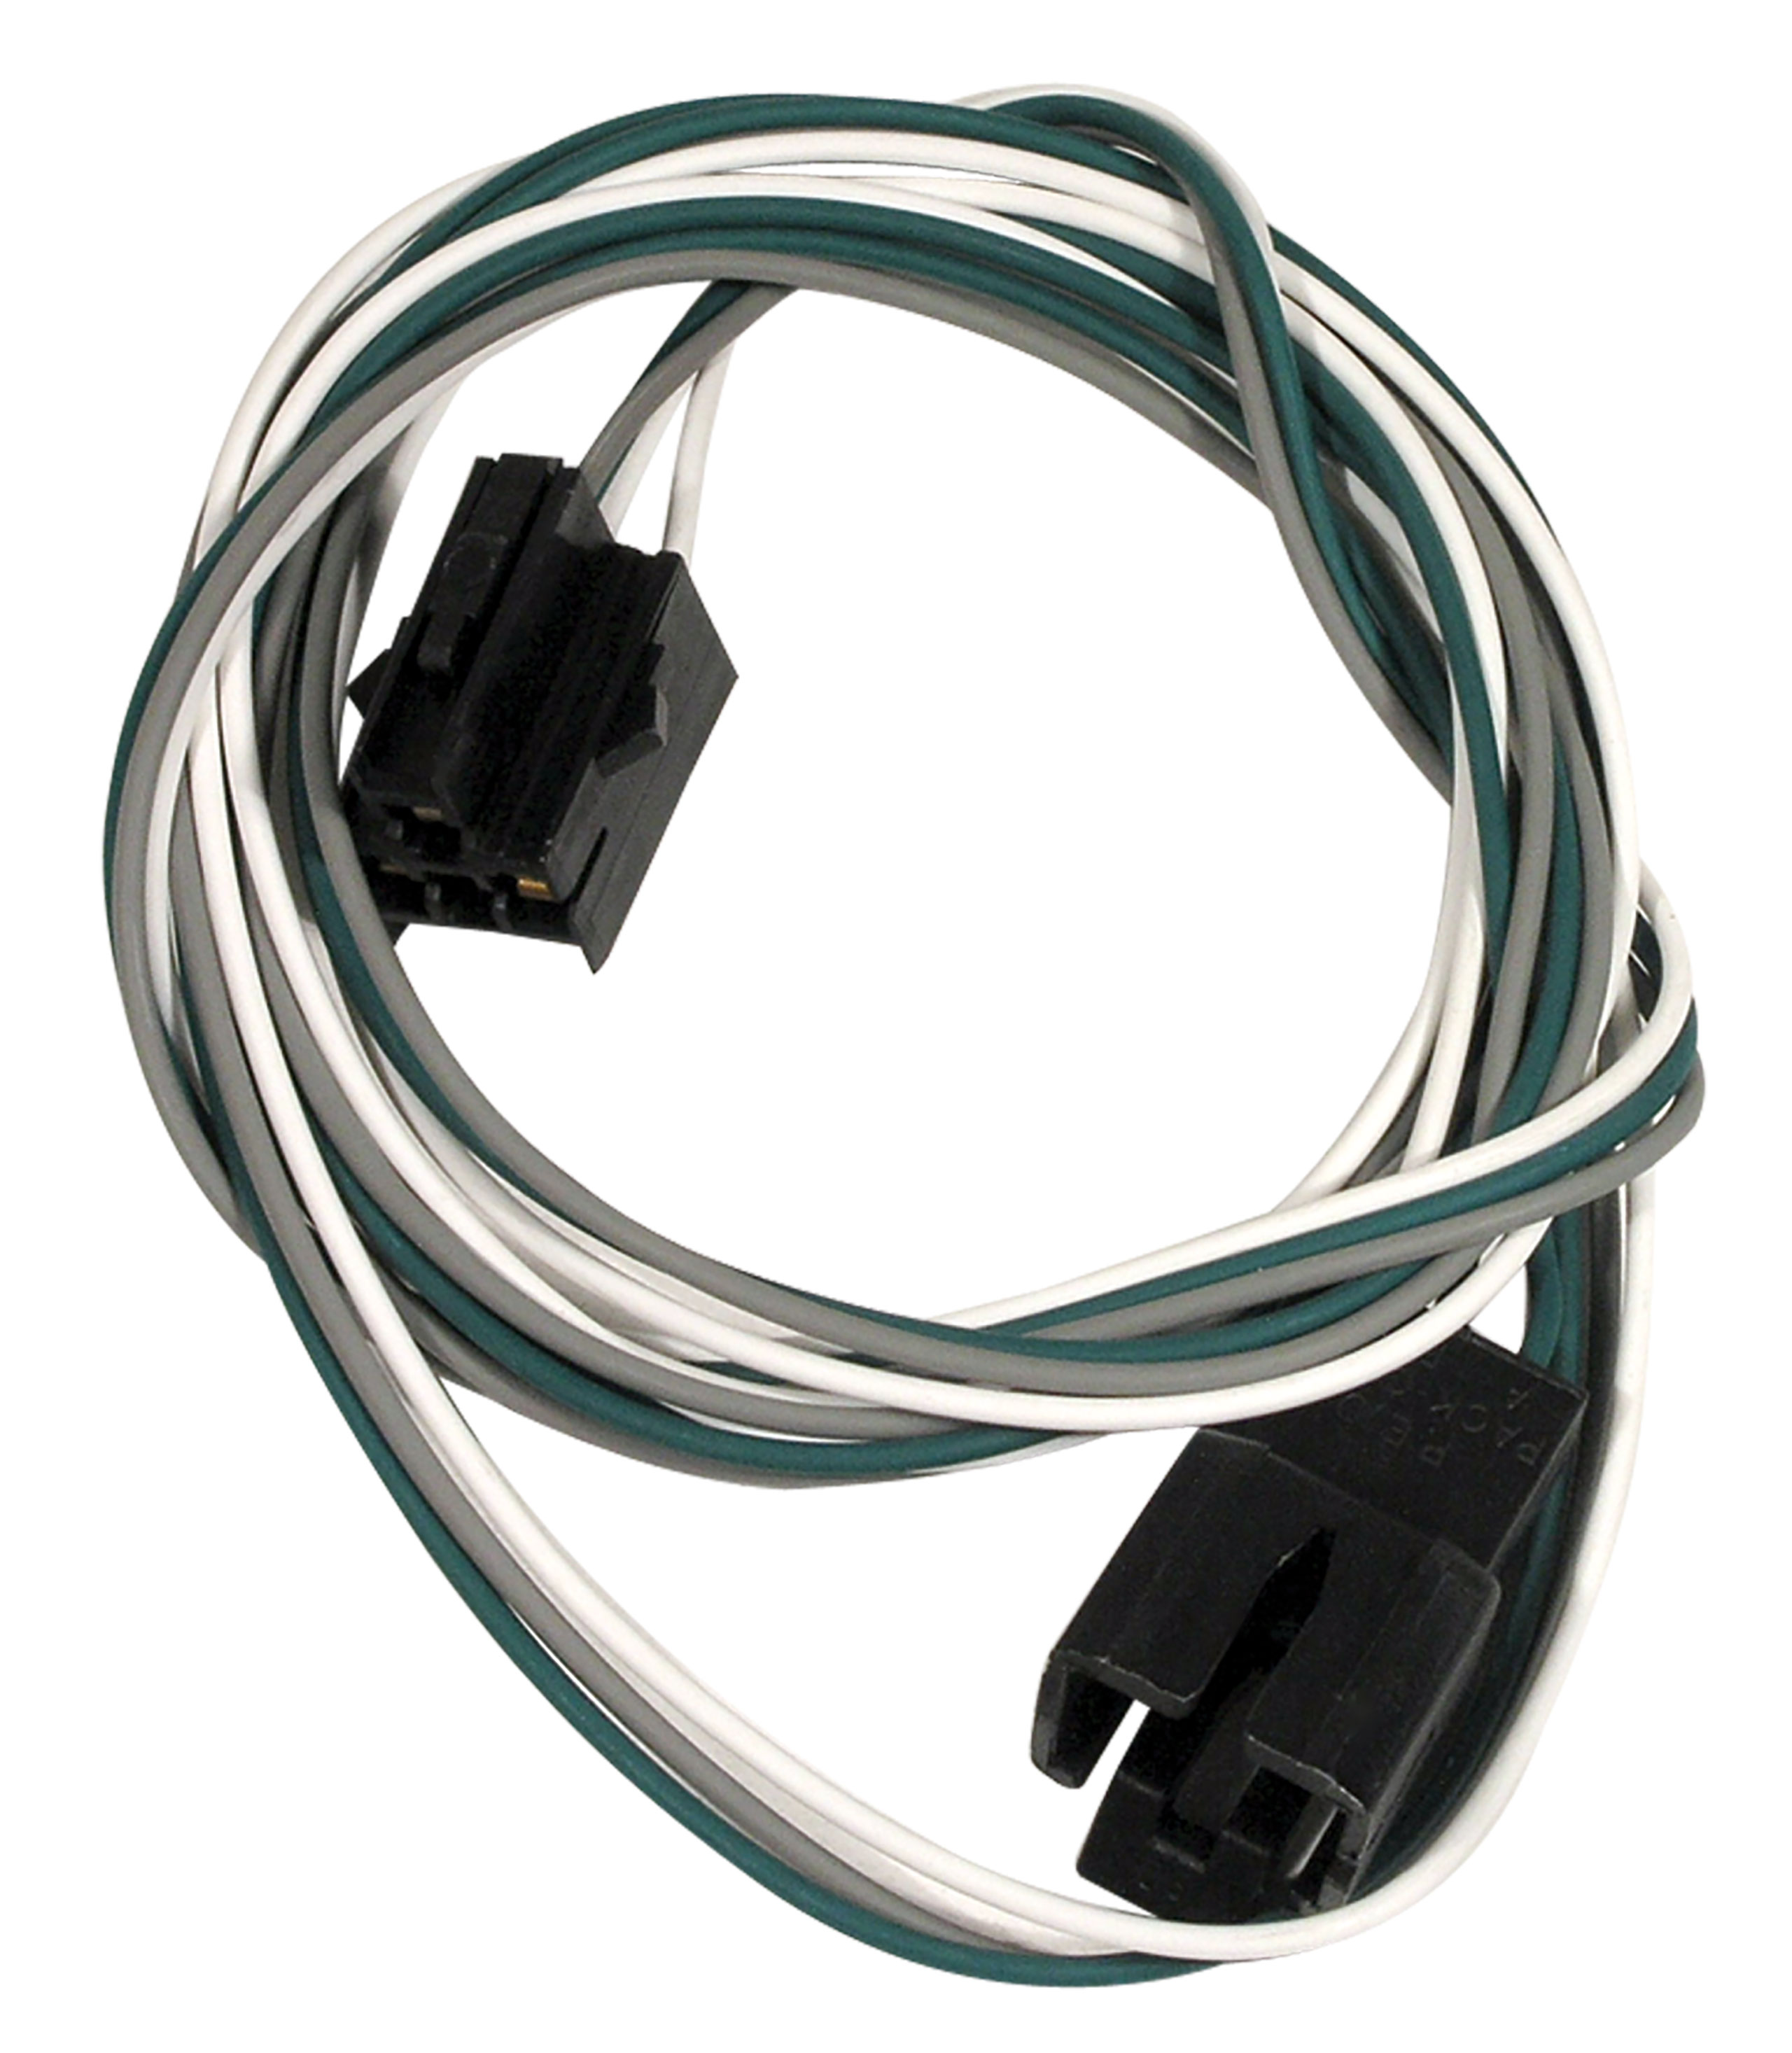 C3 1979 Chevrolet Corvette Harness. Power Antenna Relay To Antenna - Lectric Limited, Inc.